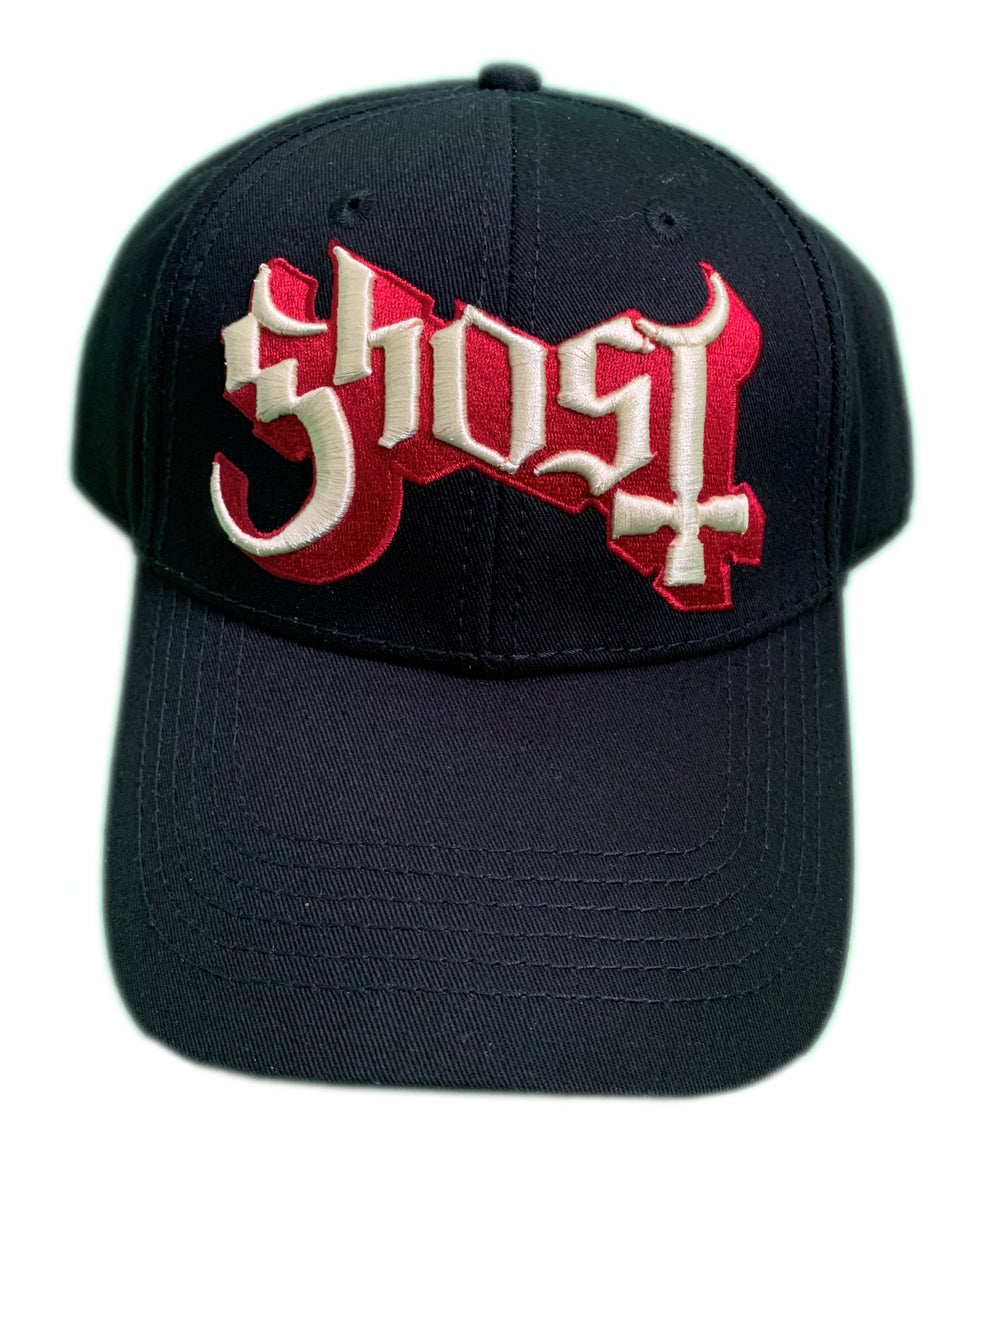 Ghost Logo Embroidery Official Peak Cap Adjustable Brand New